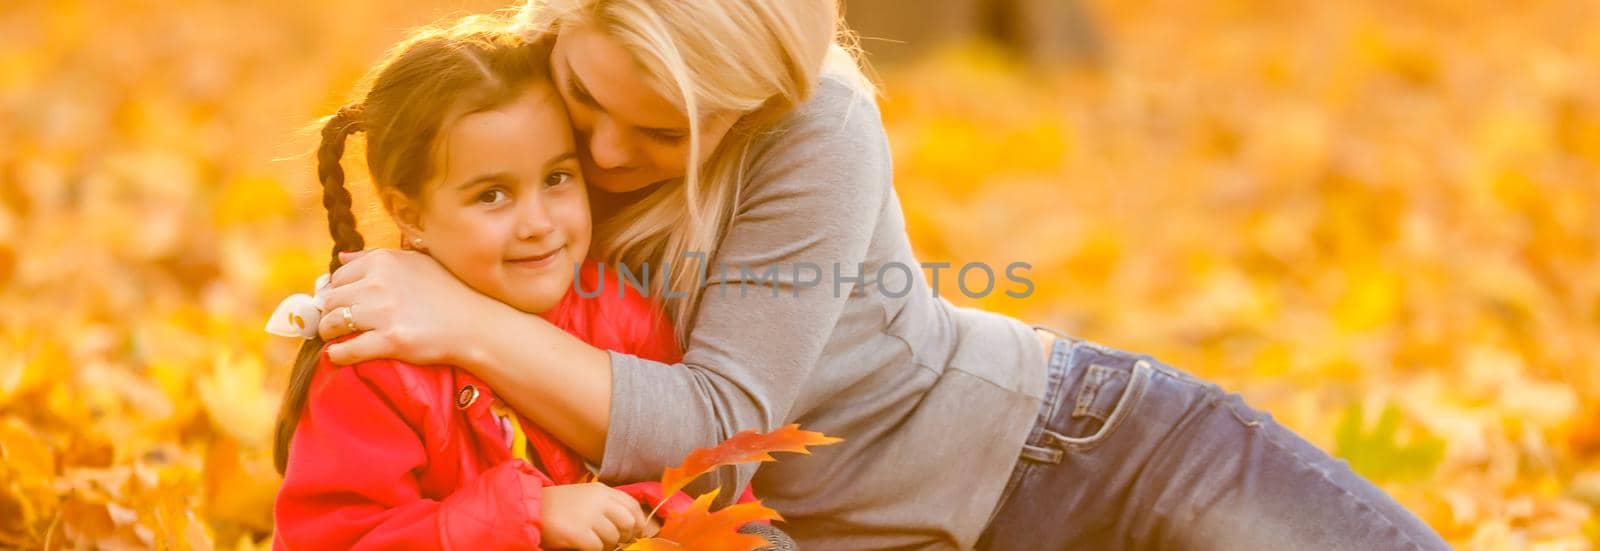 Mother with little daughter autumn park. by Andelov13